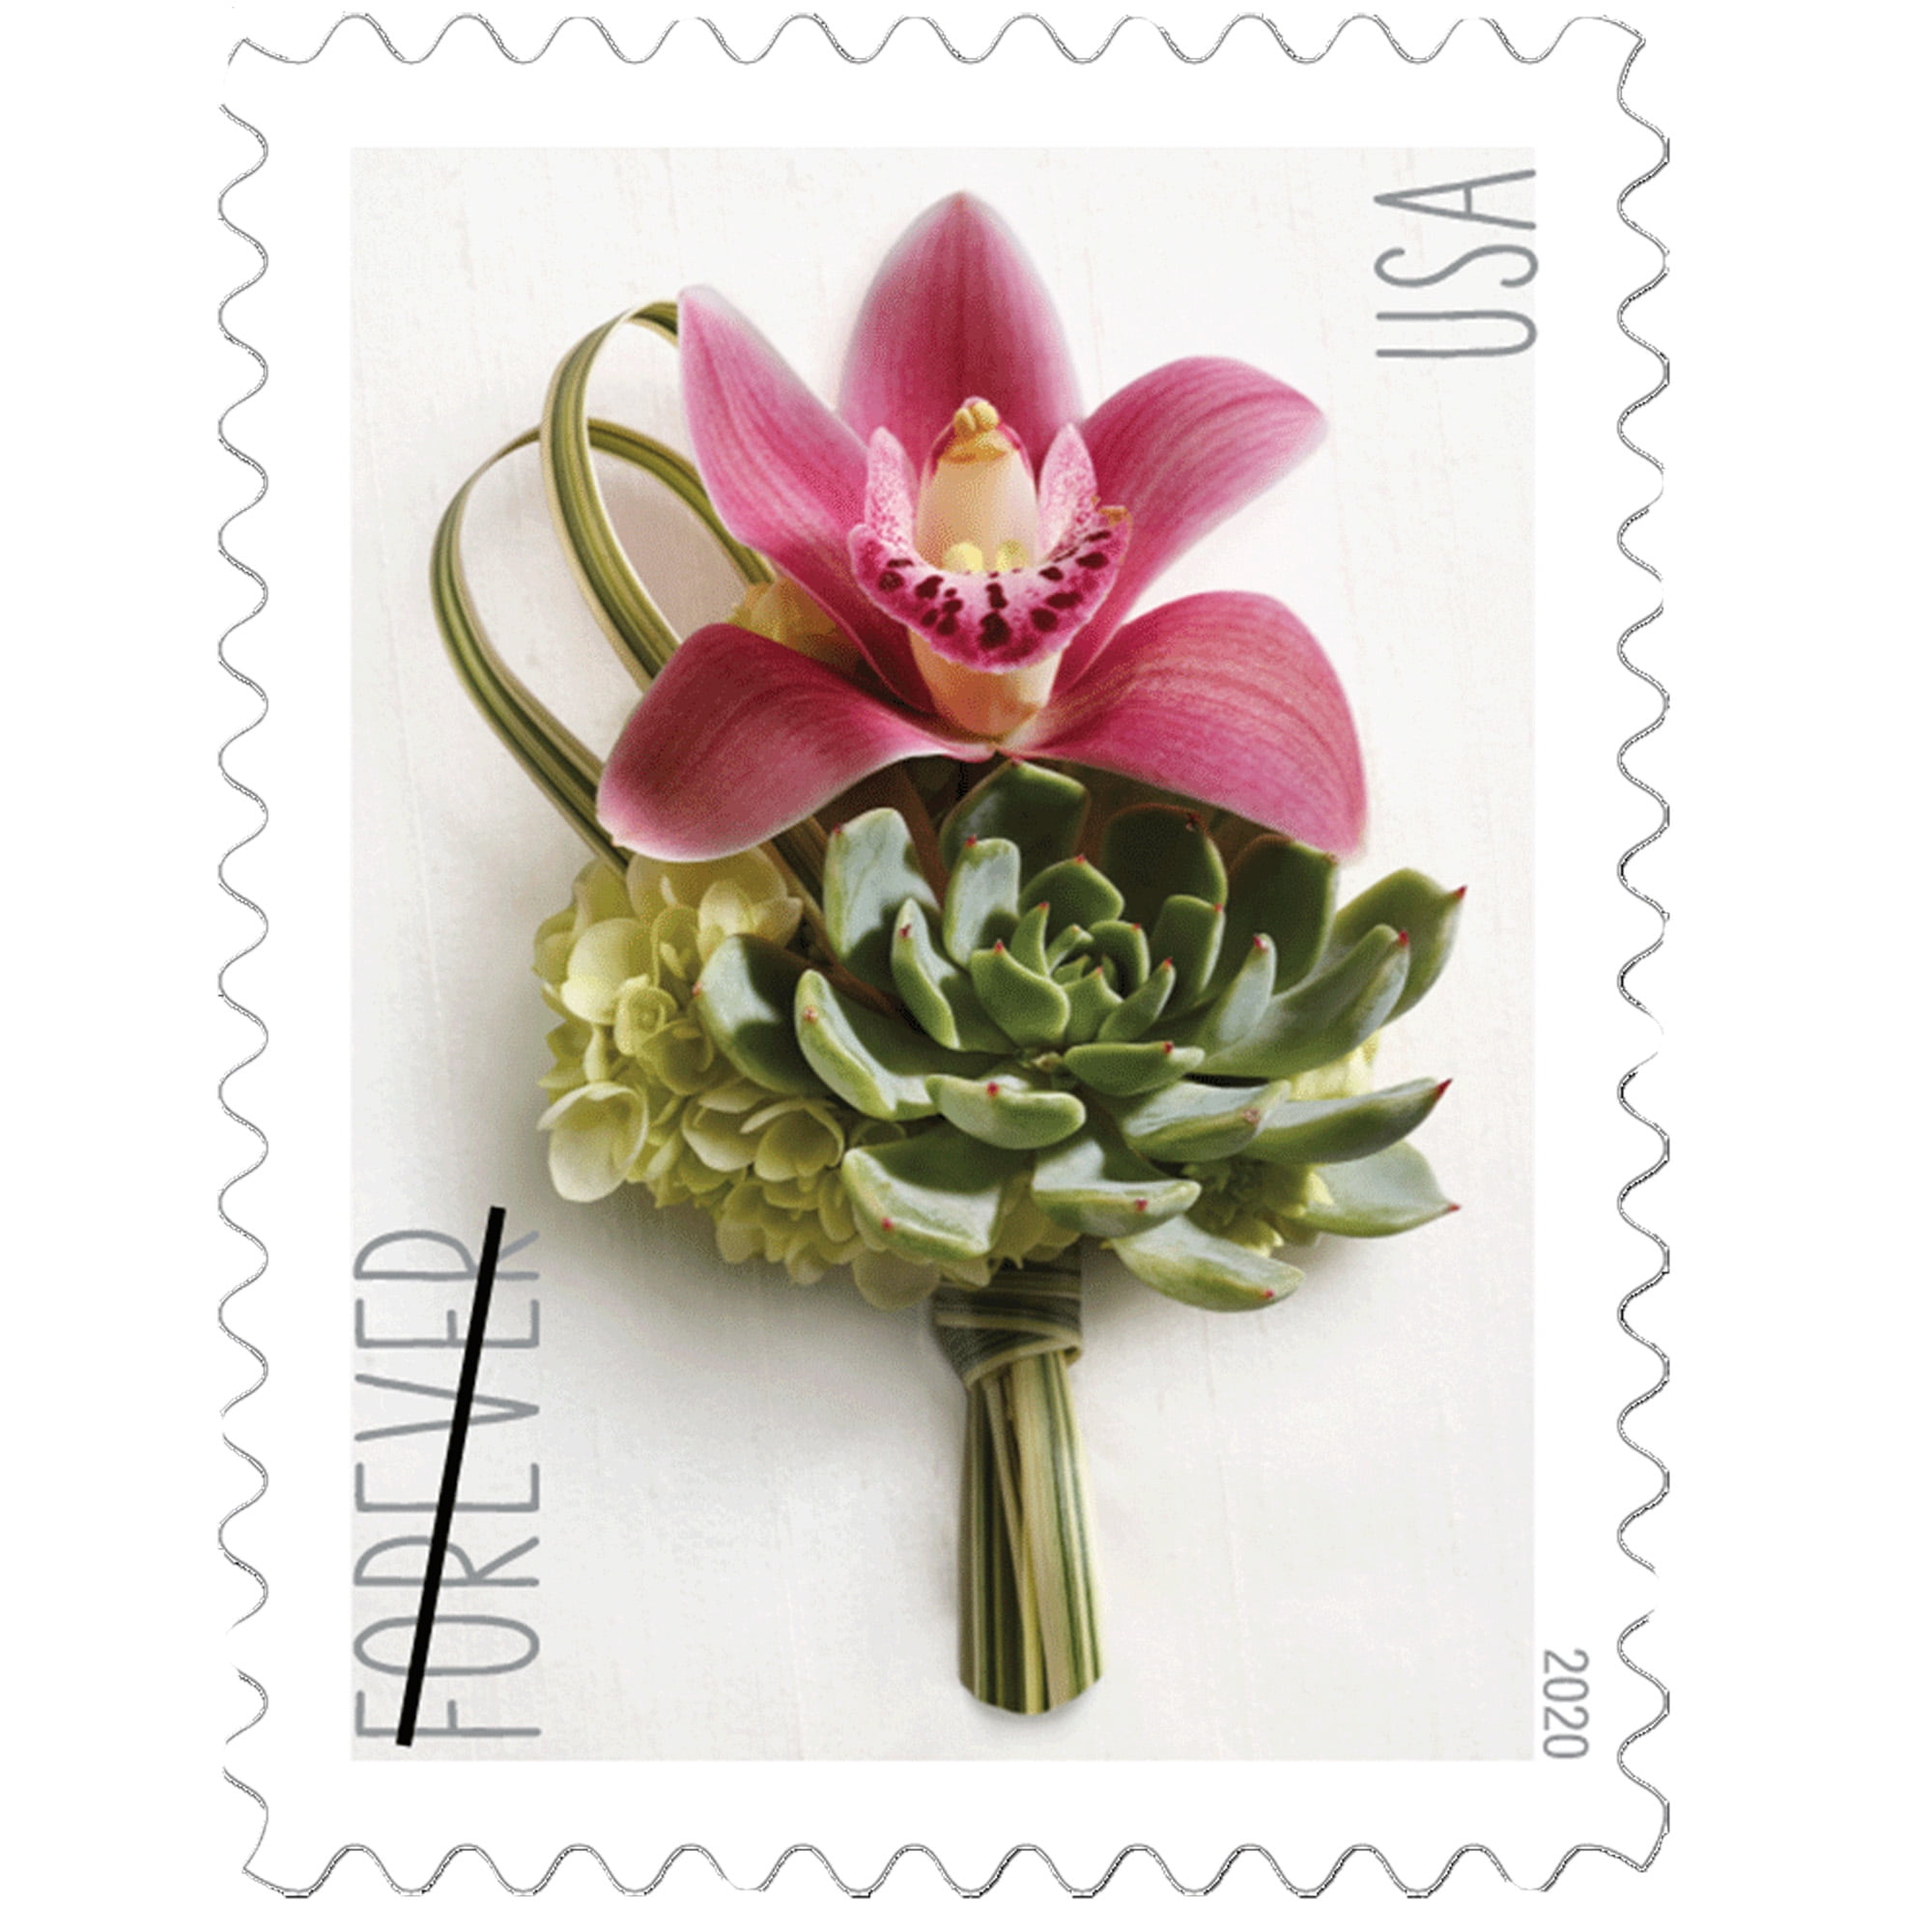 Contemporary Boutonniere Sheet of 20 USPS First Class Forever Postage Stamps Wedding Celebration